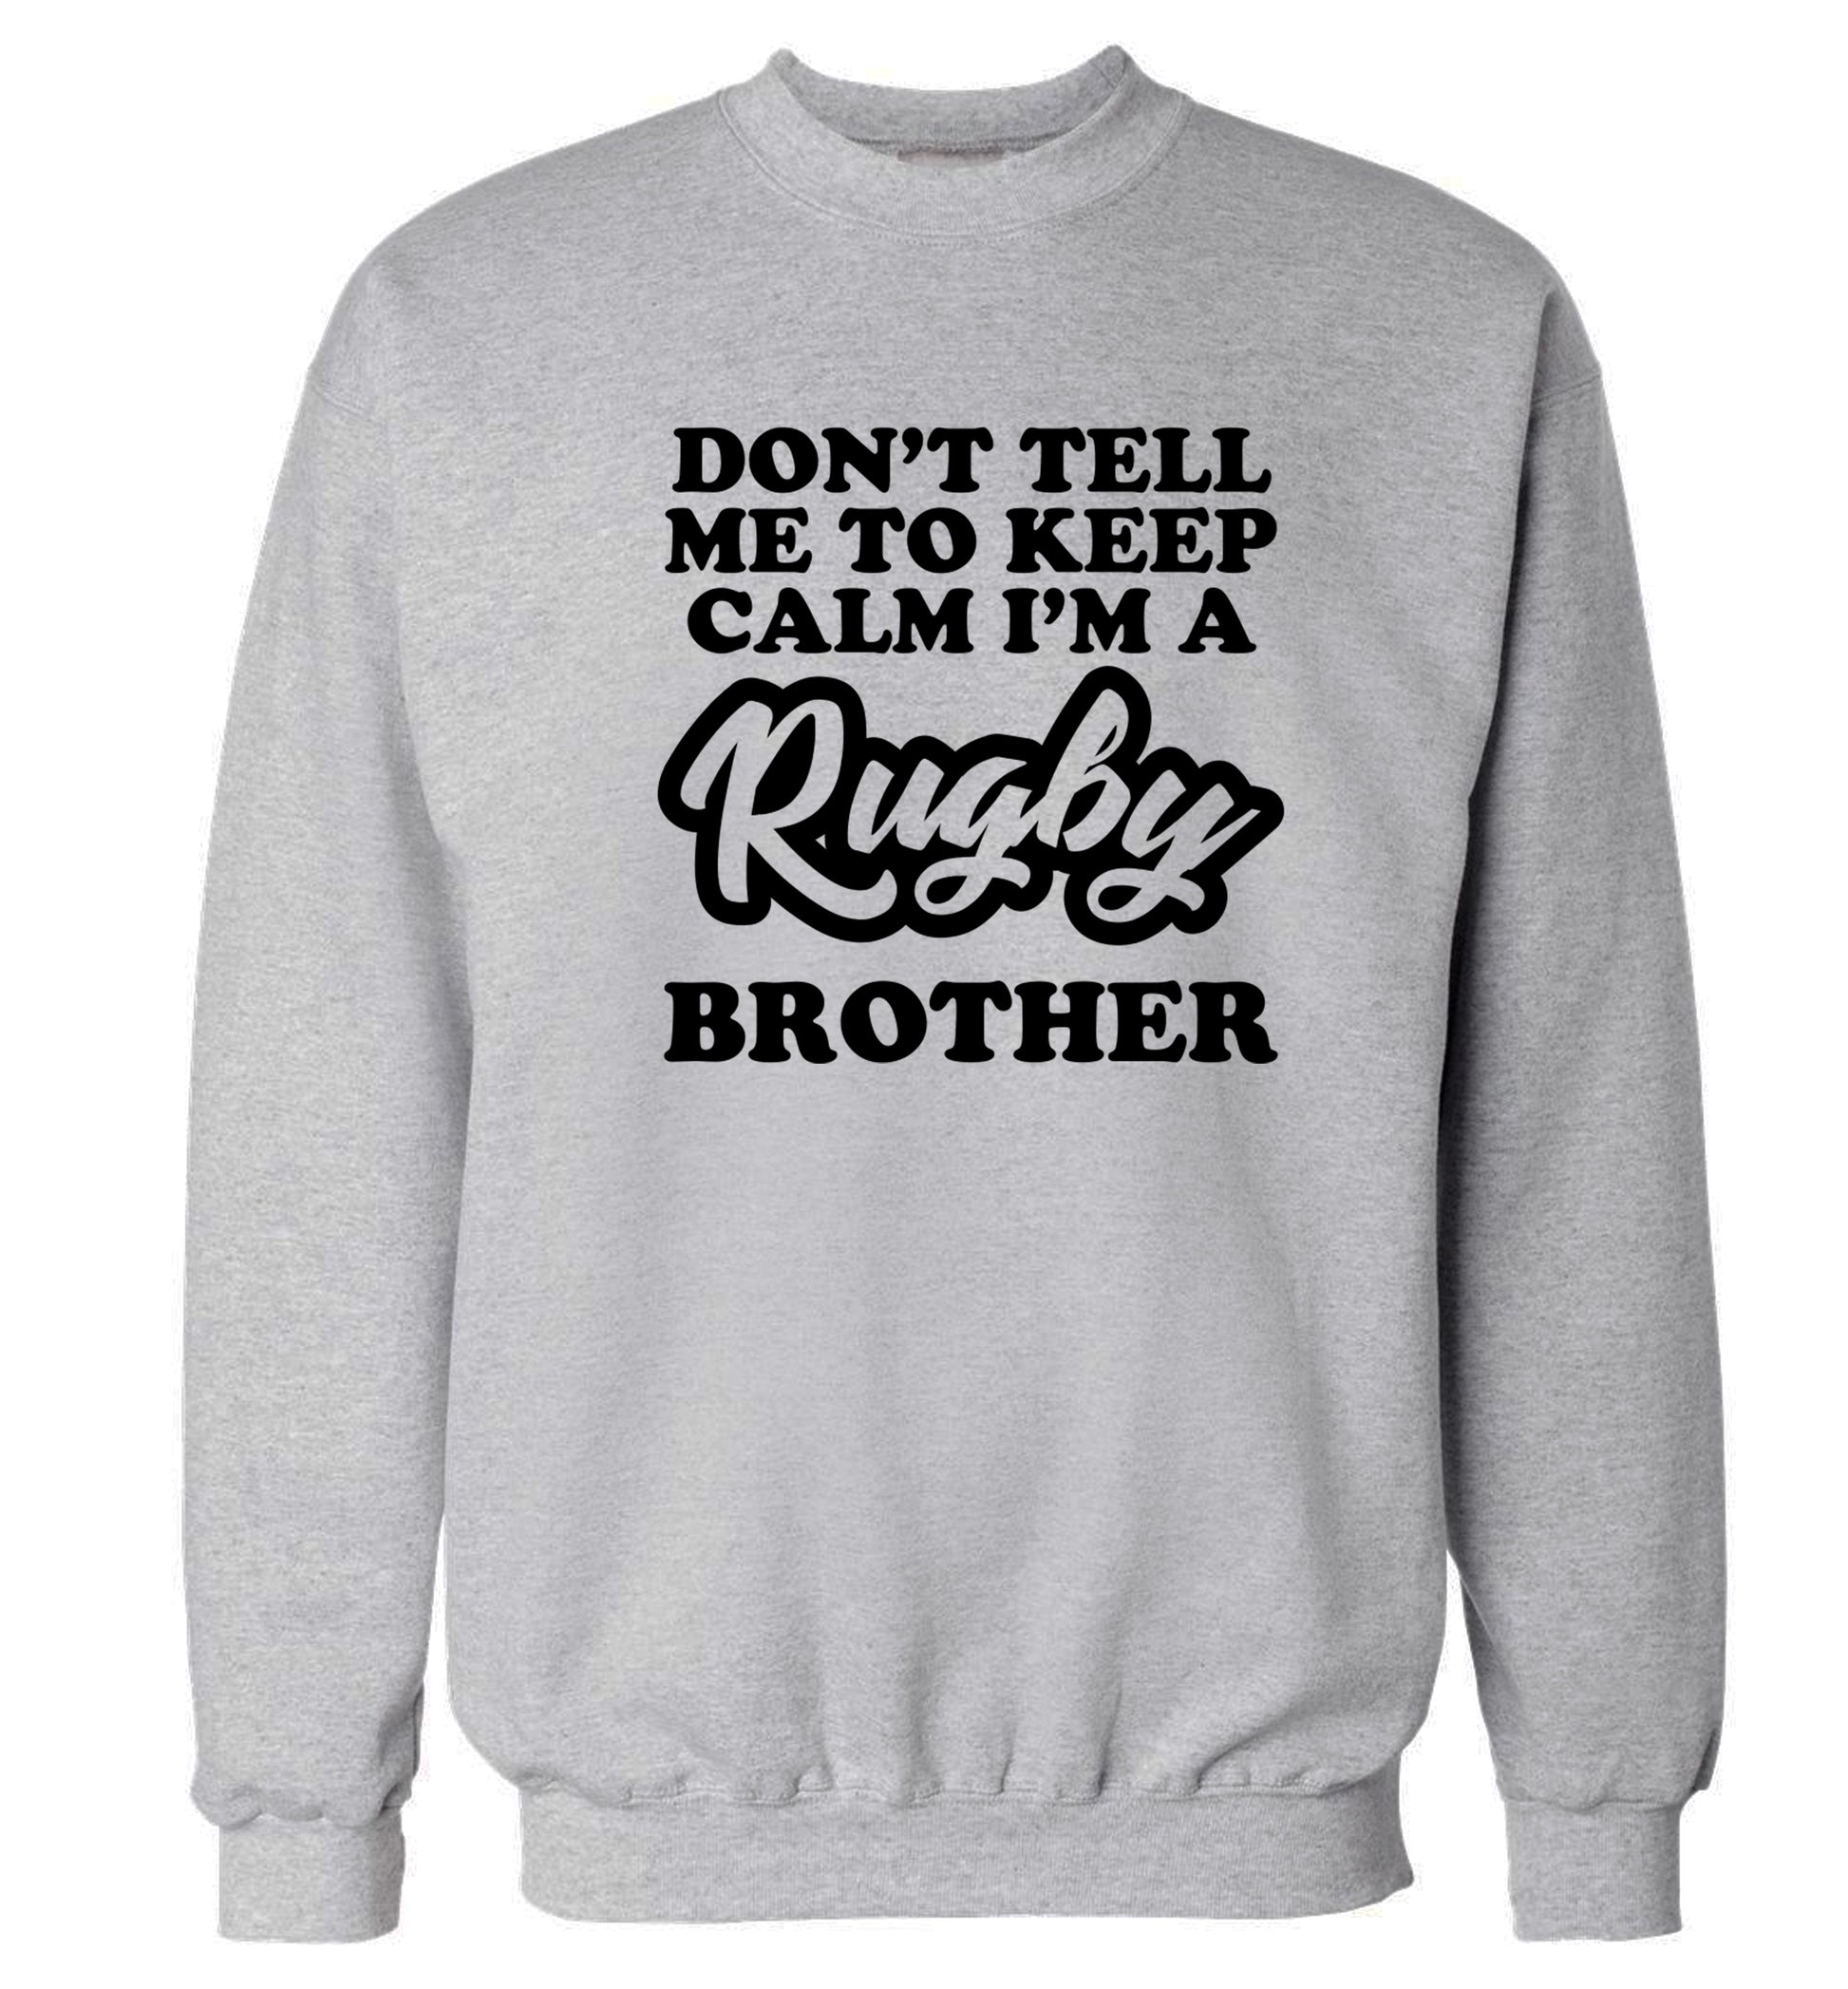 Don't tell me keep calm I'm a rugby brother Adult's unisex grey Sweater 2XL